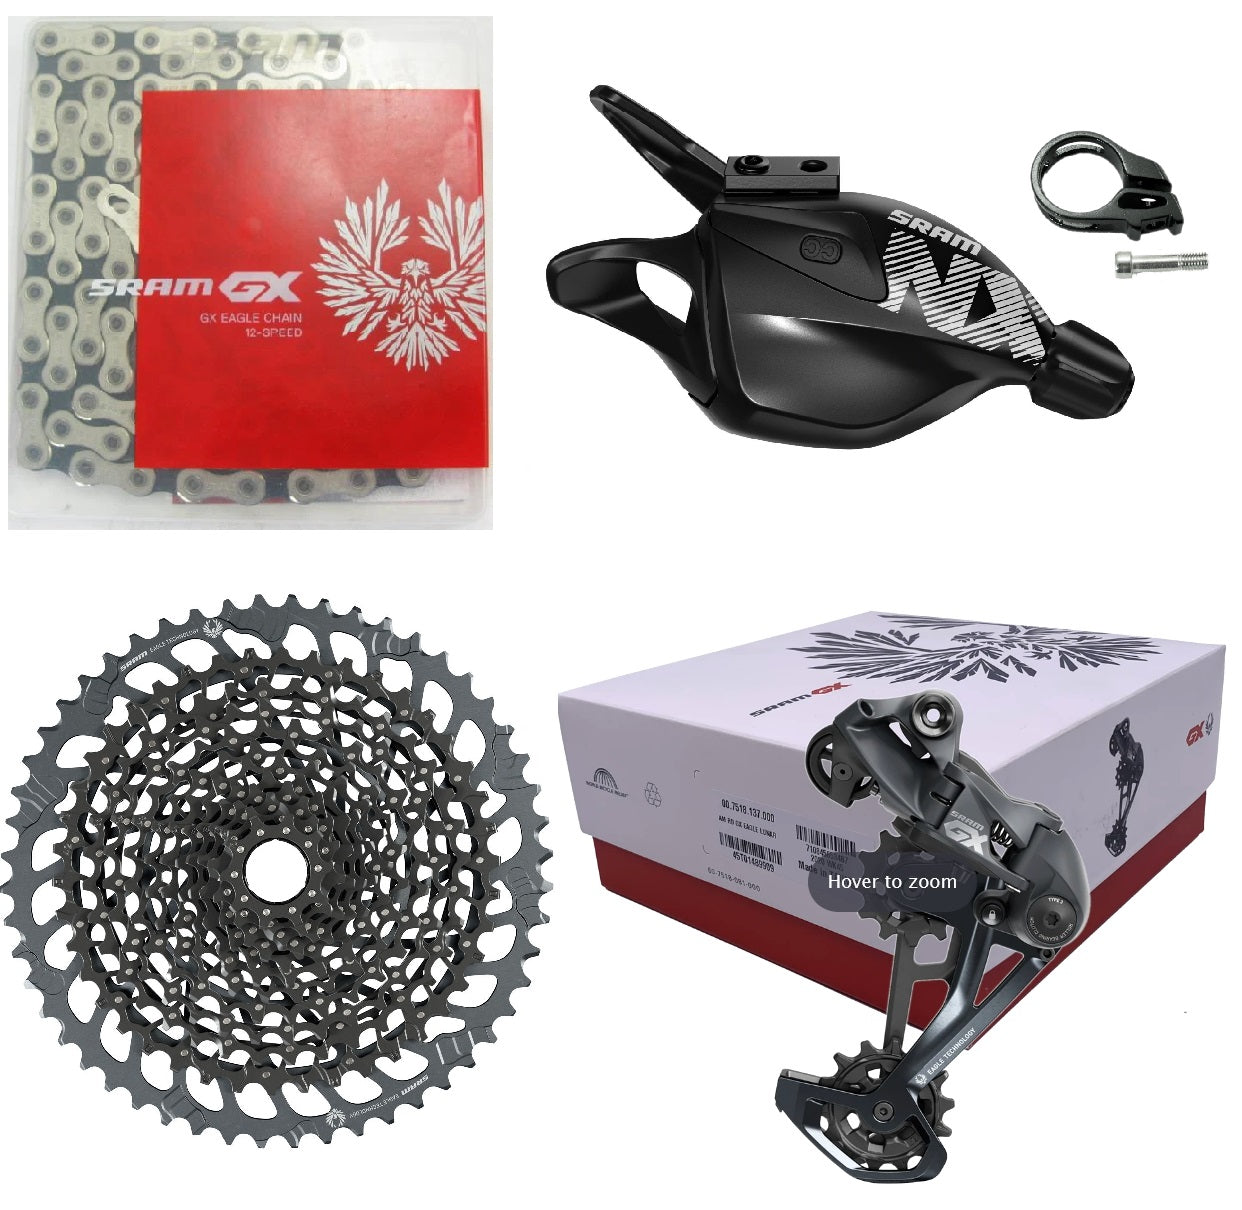 SRAM GX 12-speed Group with Nx Shifter - The Bikesmiths